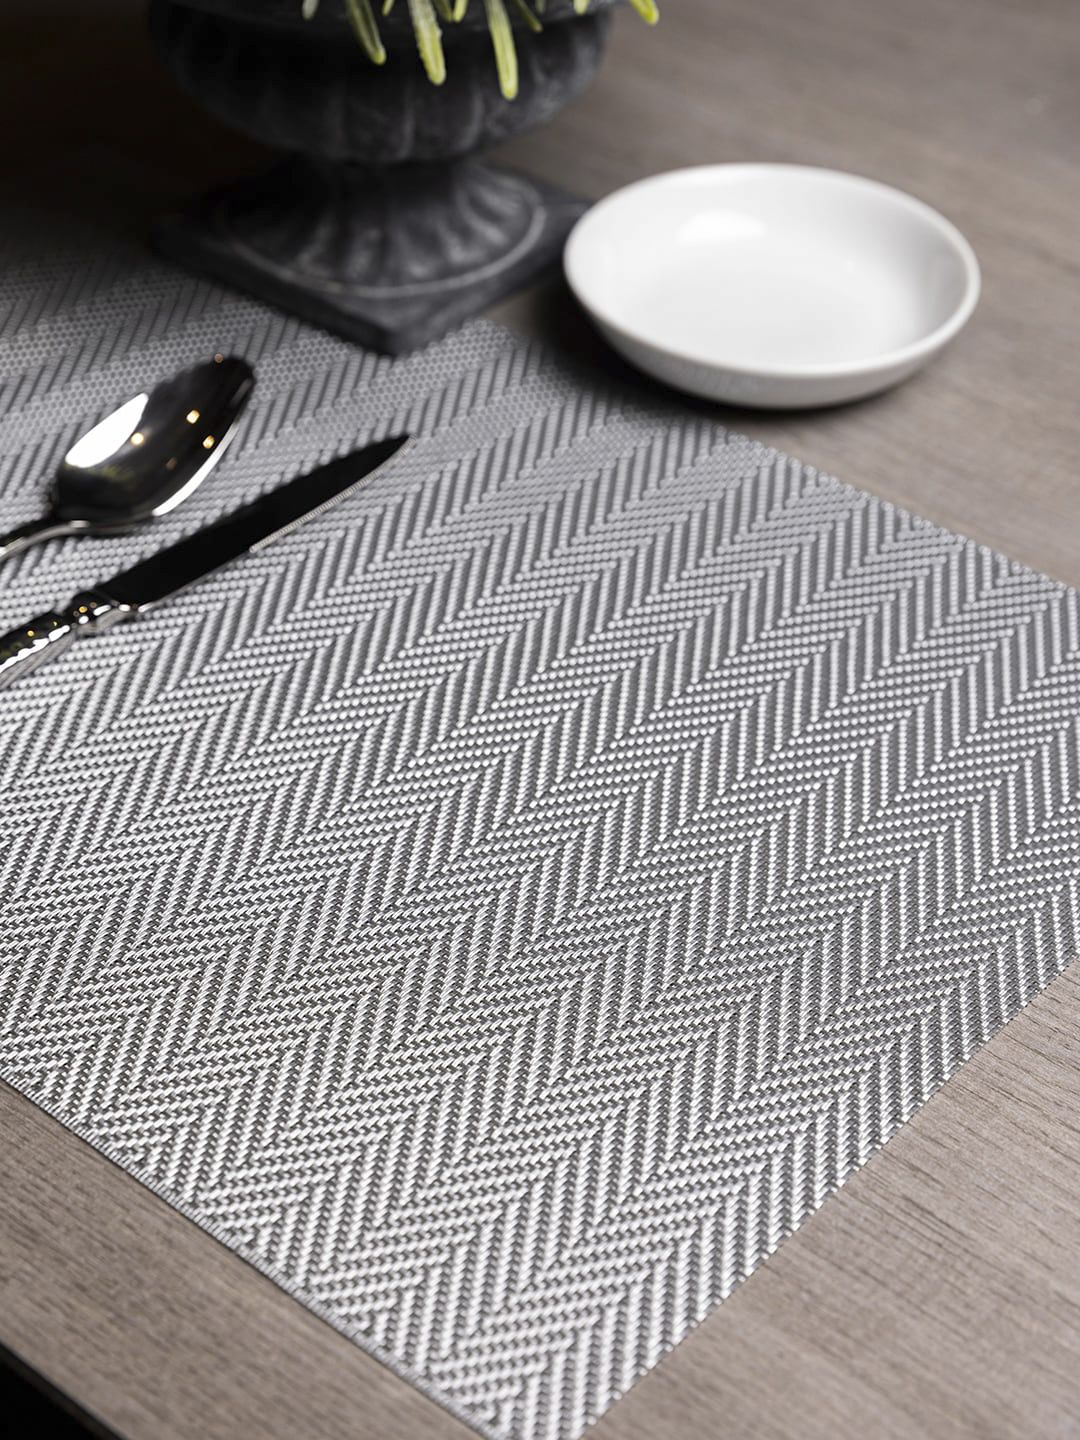 Pure Home and Living Set of 6 Silver-Toned Geometric Rectangular Table Placemats Price in India